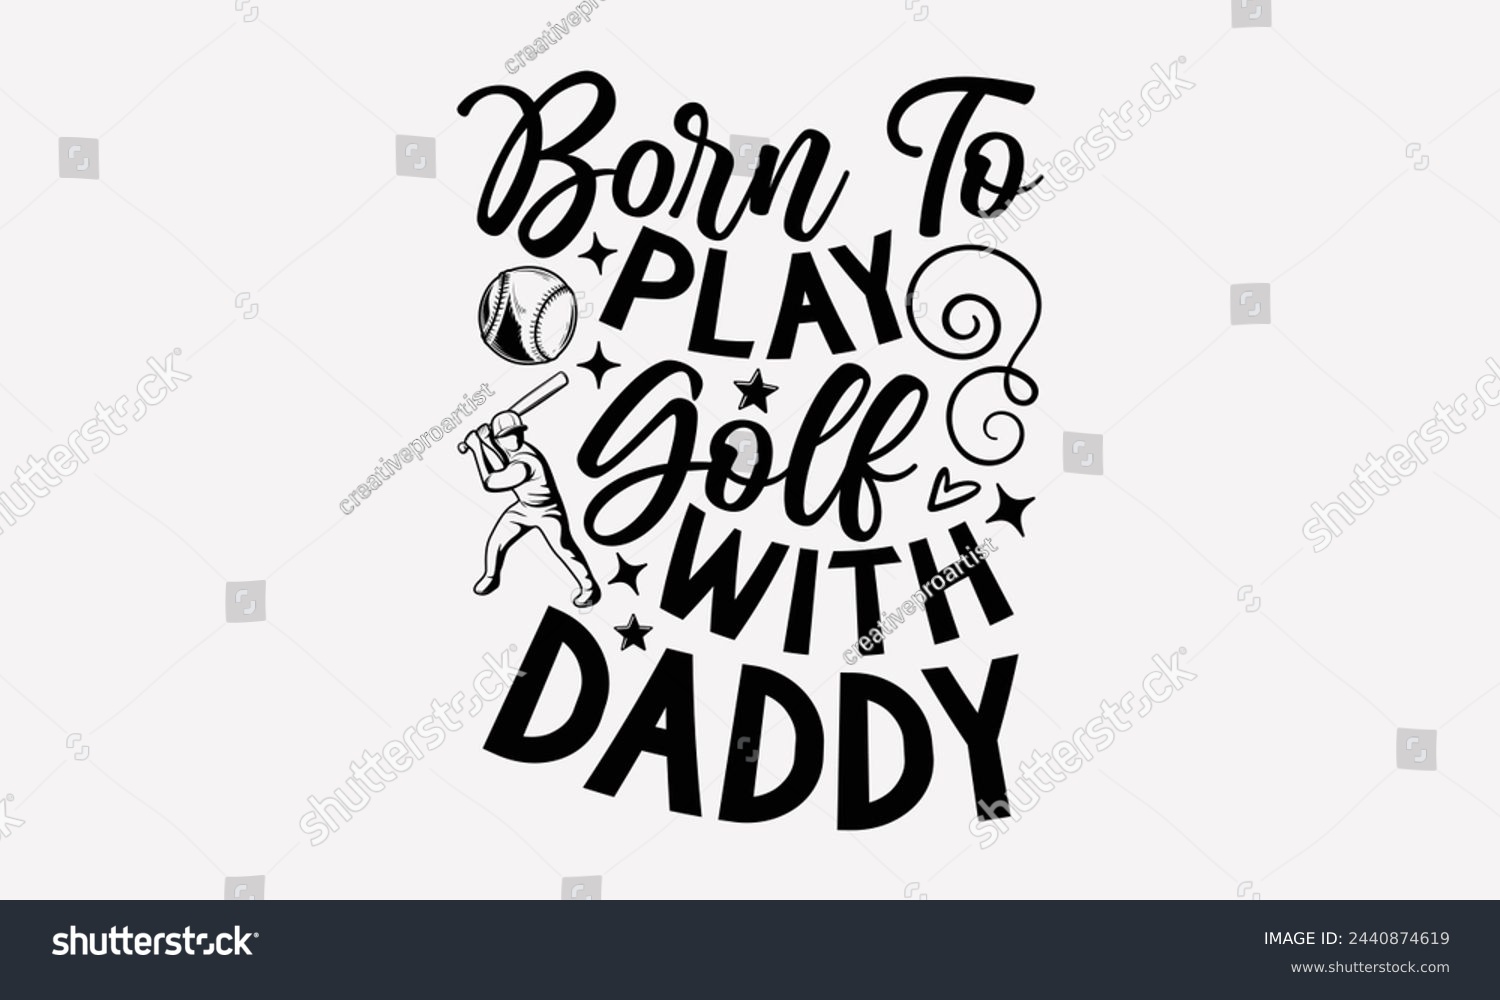 SVG of Born To Play Golf With Daddy- Golf t- shirt design, Hand drawn lettering phrase isolated on white background, for Cutting Machine, Silhouette Cameo, Cricut, greeting card template with typography text svg